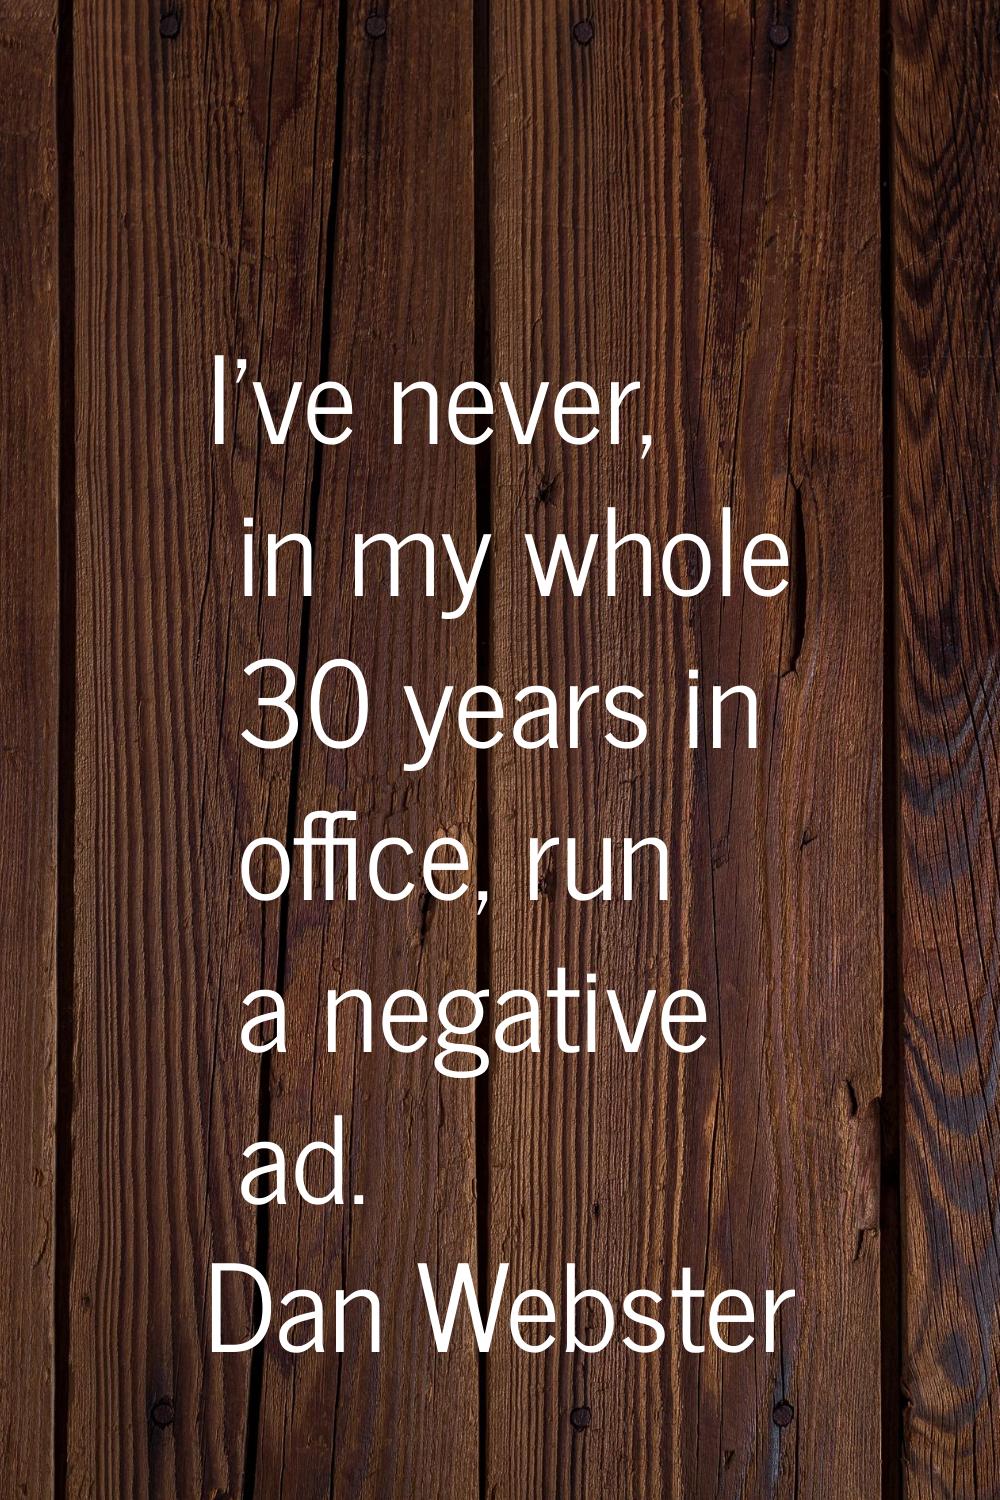 I've never, in my whole 30 years in office, run a negative ad.